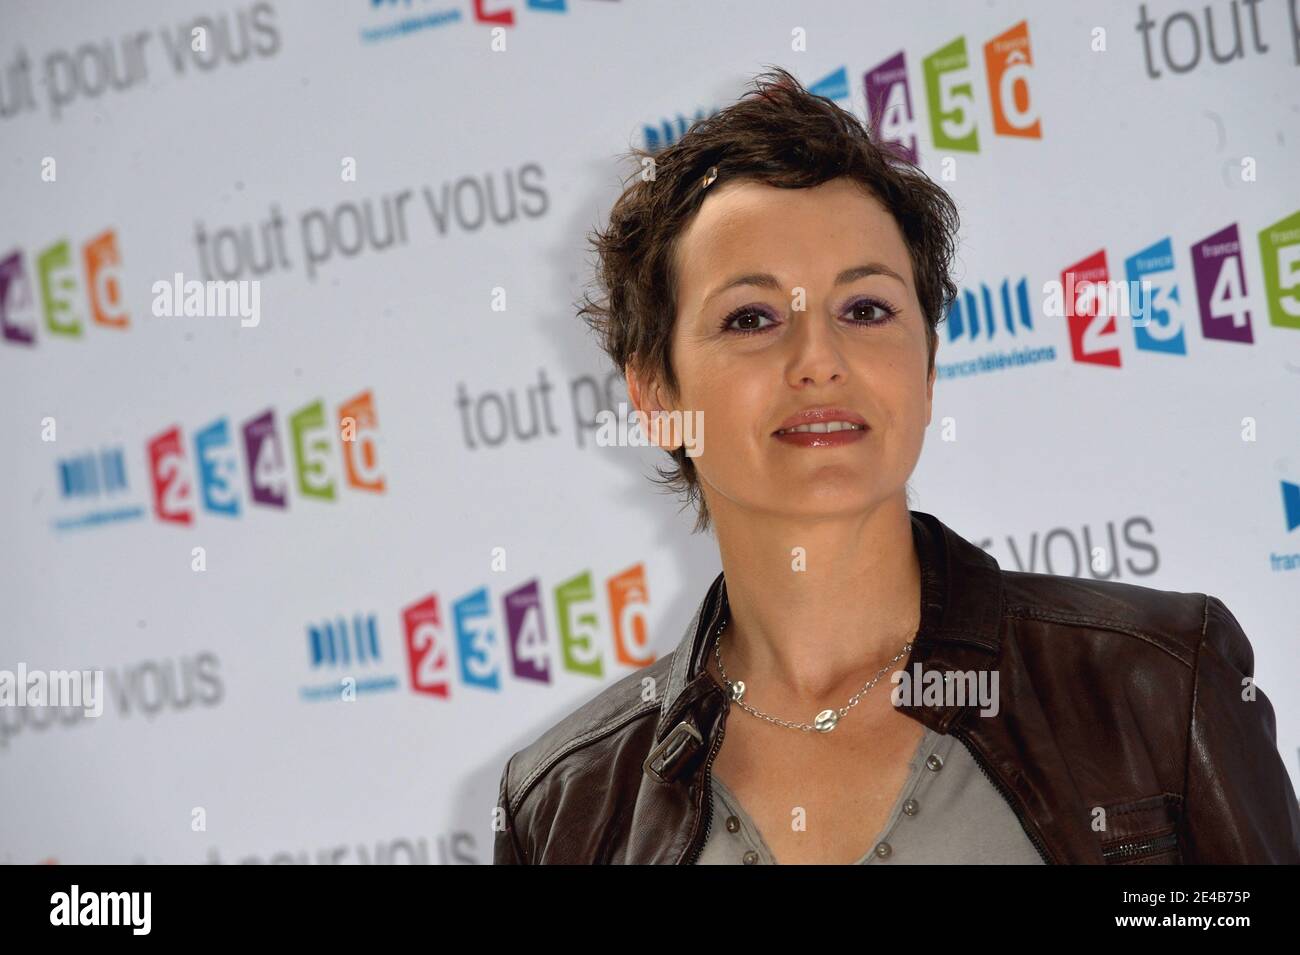 Sophie Jovillard arriving at the annual press conference of France  Televisions group in Paris, France on August 27, 2009. Photo by  Gorassini-Nebinger/ABACAPRESS.COM Stock Photo - Alamy